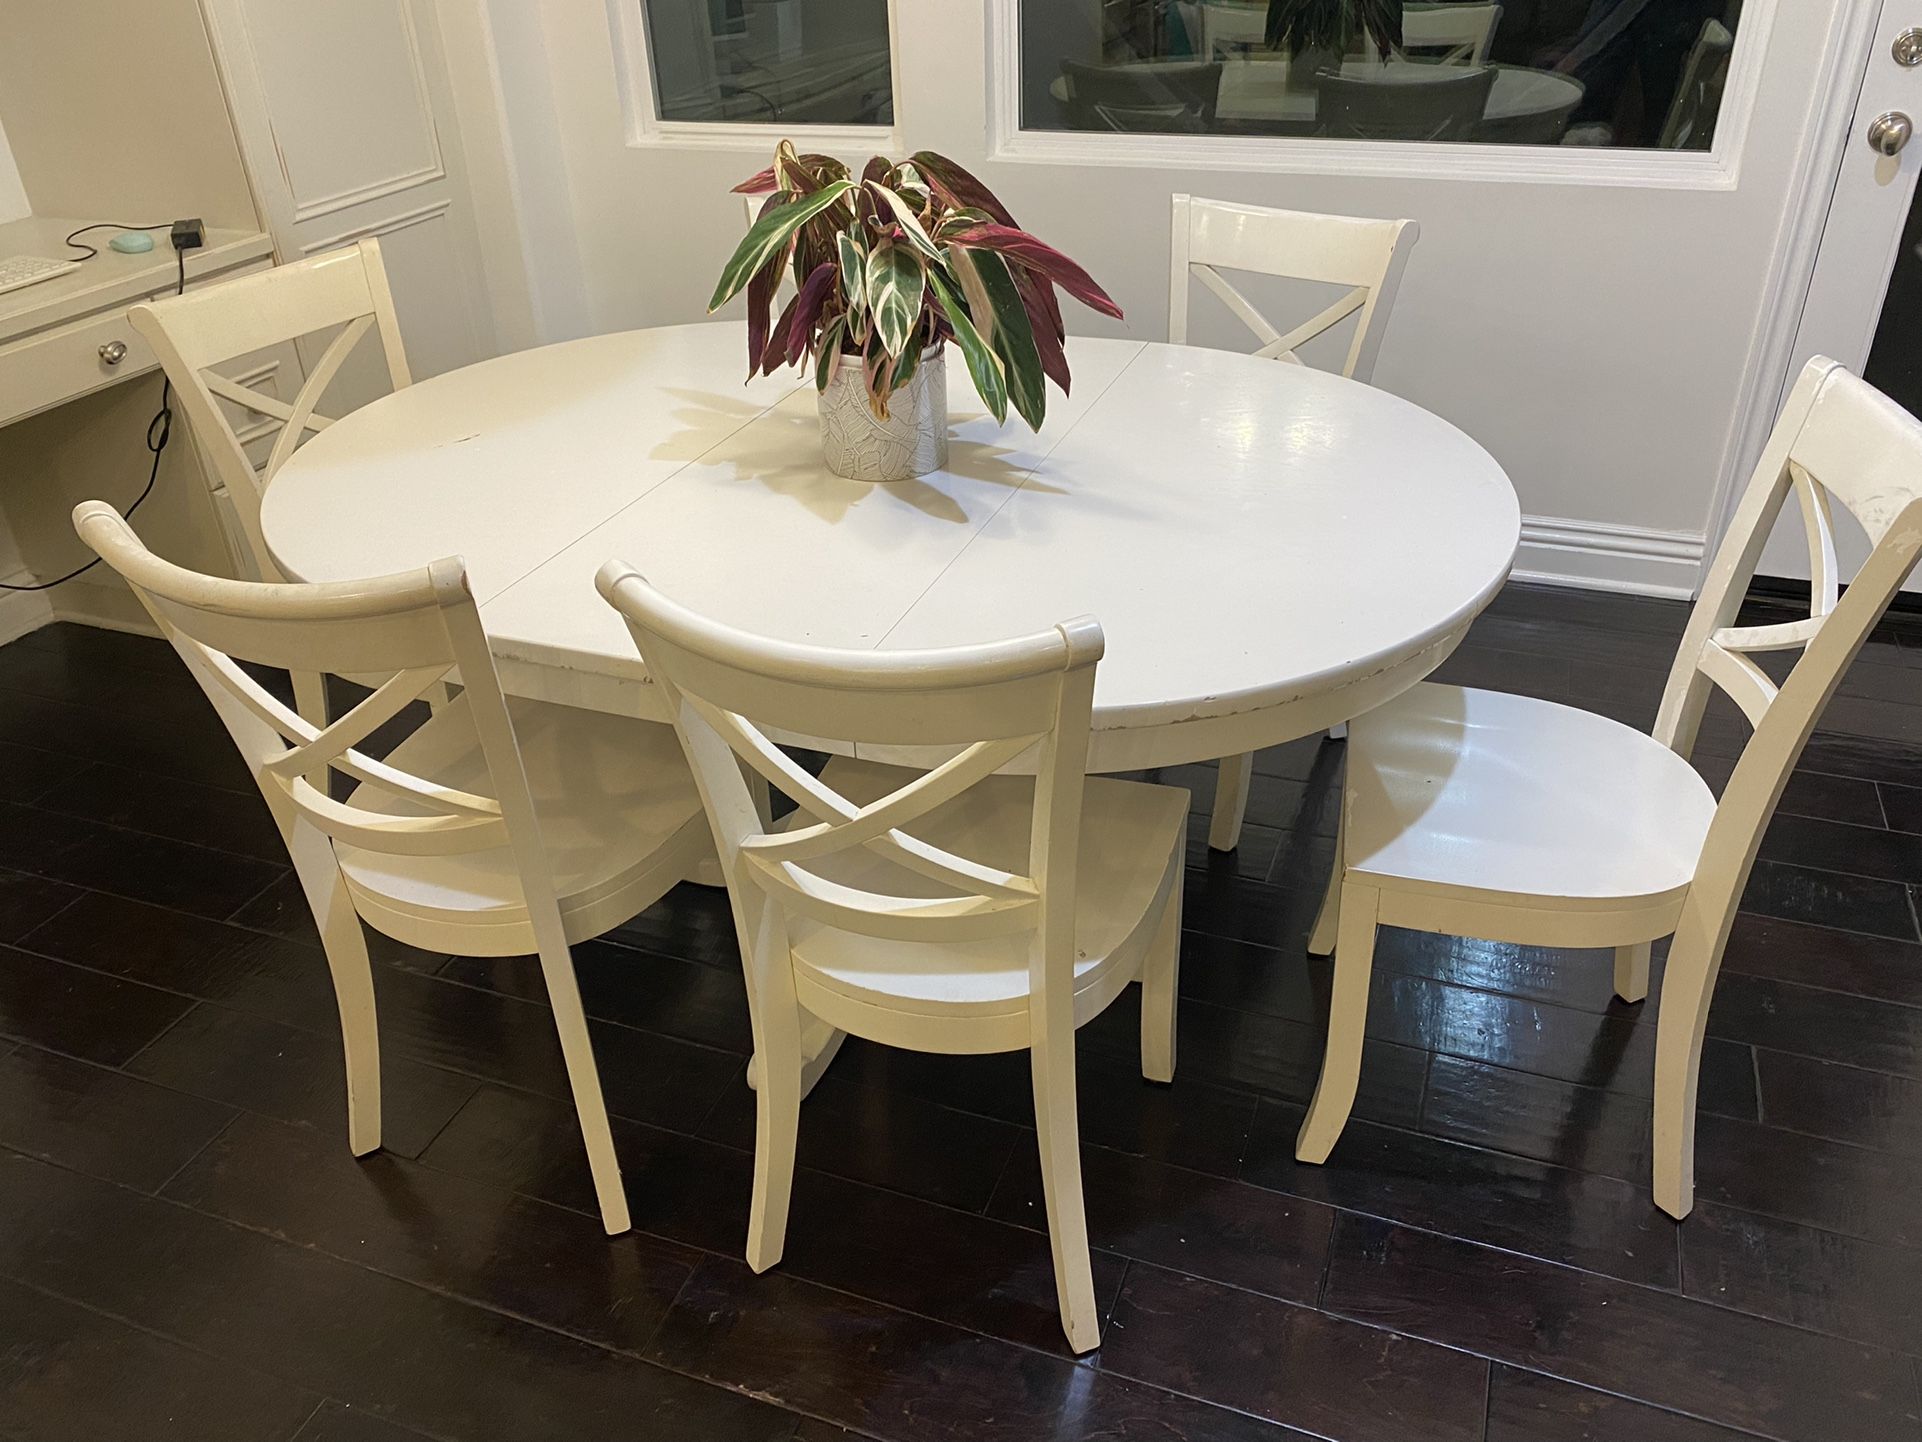 Crate & Barrel White Dining Room Table With 6 chairs 